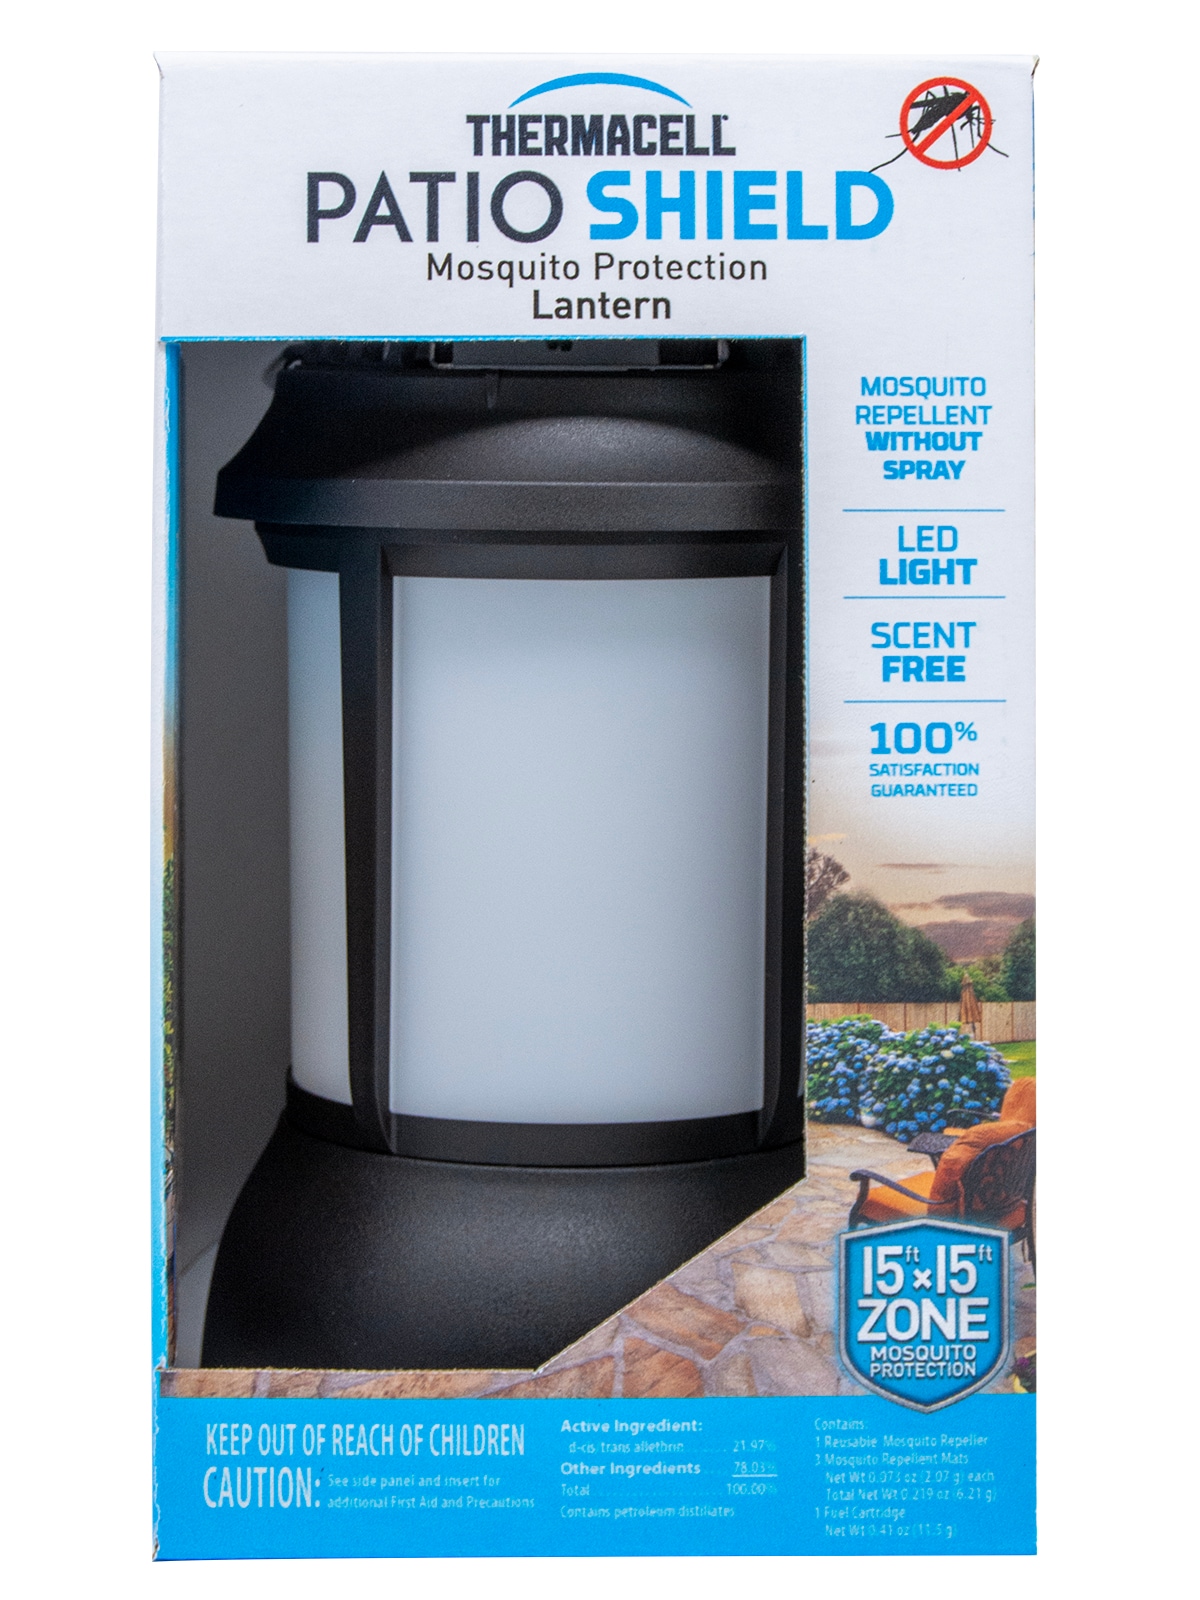 Logisk Gentagen Antagelse Thermacell Patio Shield Unscented All Purpose Outdoor Lantern in the Insect  Repellents department at Lowes.com